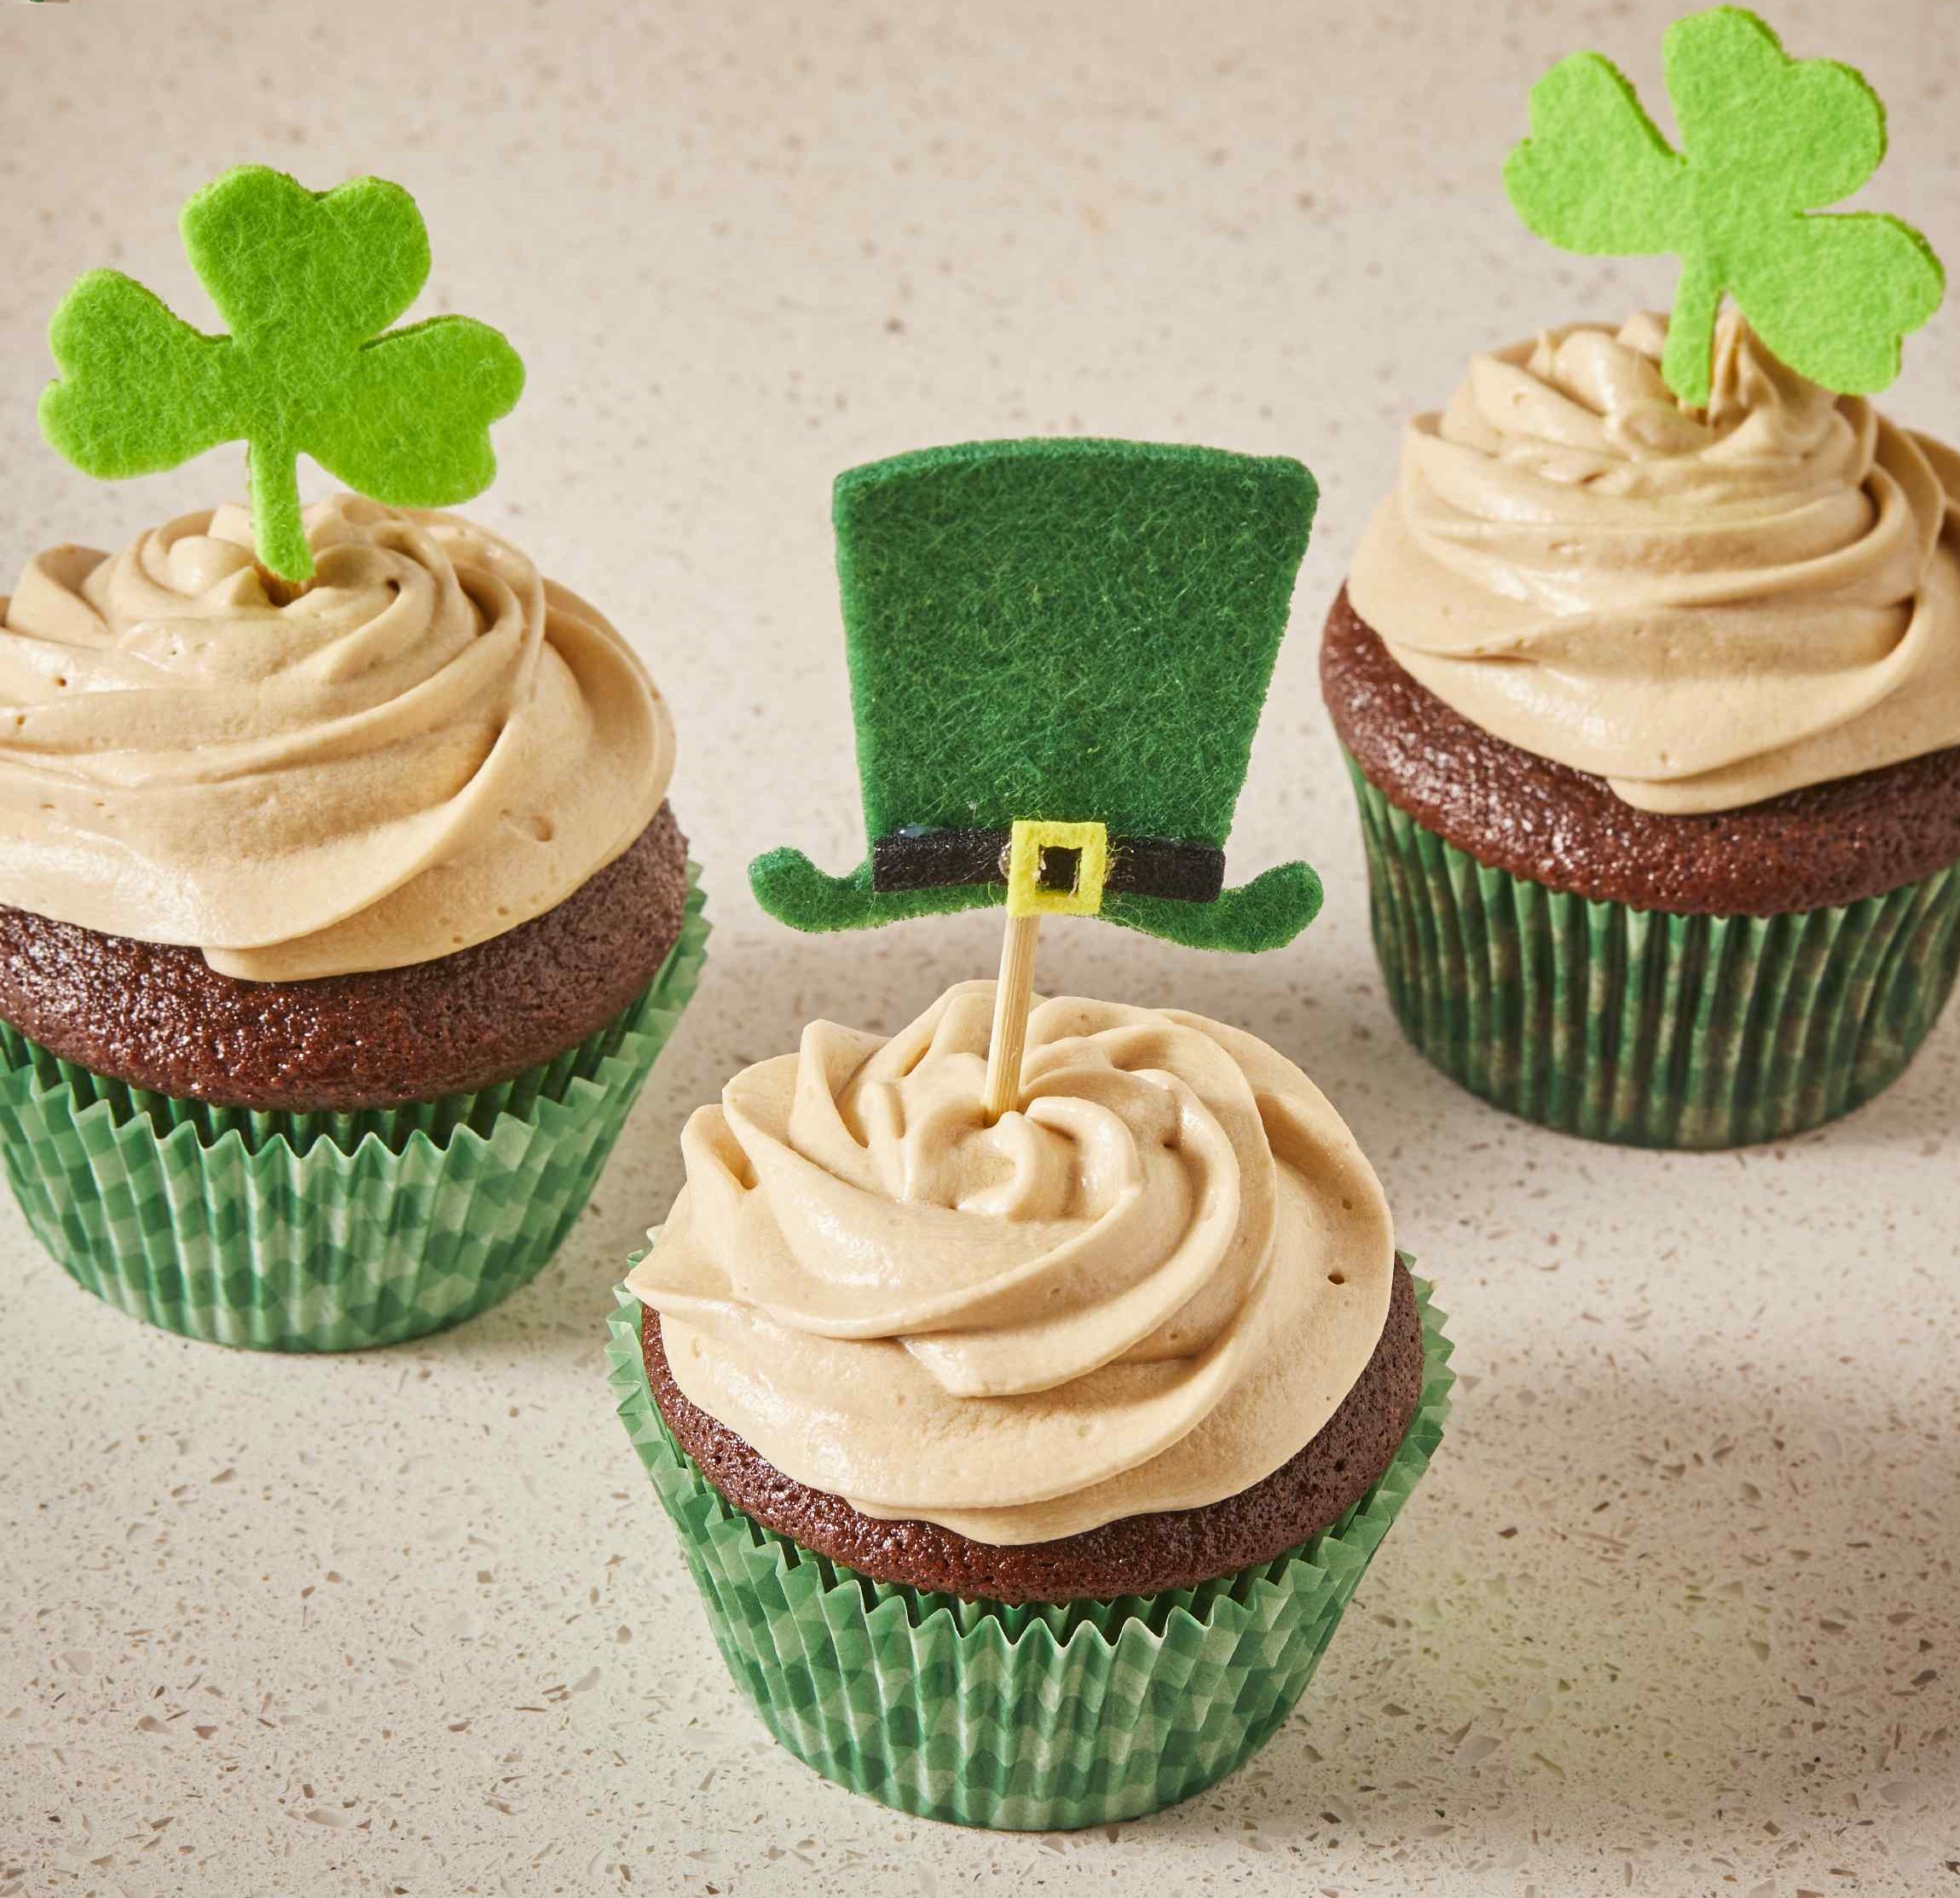 Guinness® Cupcakes with Espresso Frosting